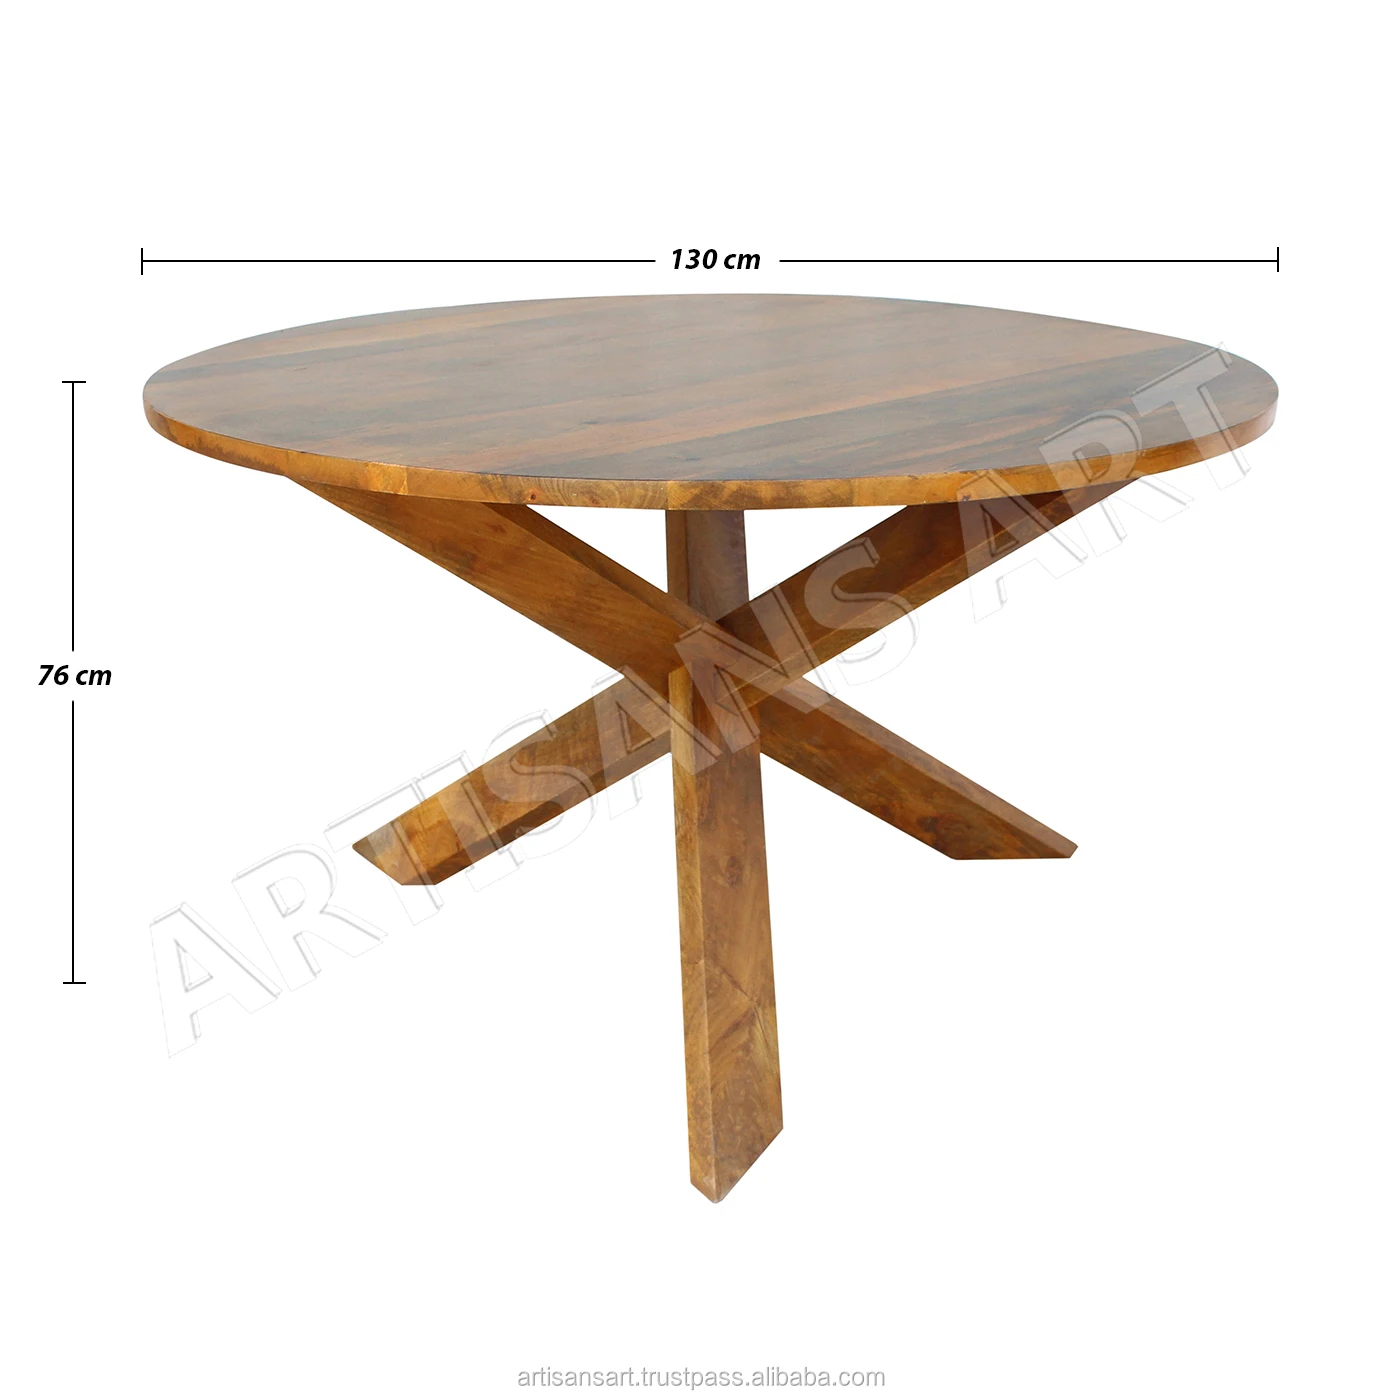 Mid Century Modern Round Dining Table Solid Wood Tripod Legs Dining Table Wonderful Dining Room Furniture Design Buy Round Dining Table Ultra Modern Dining Room Tables Tripod Legs Dining Table Product On Alibaba Com